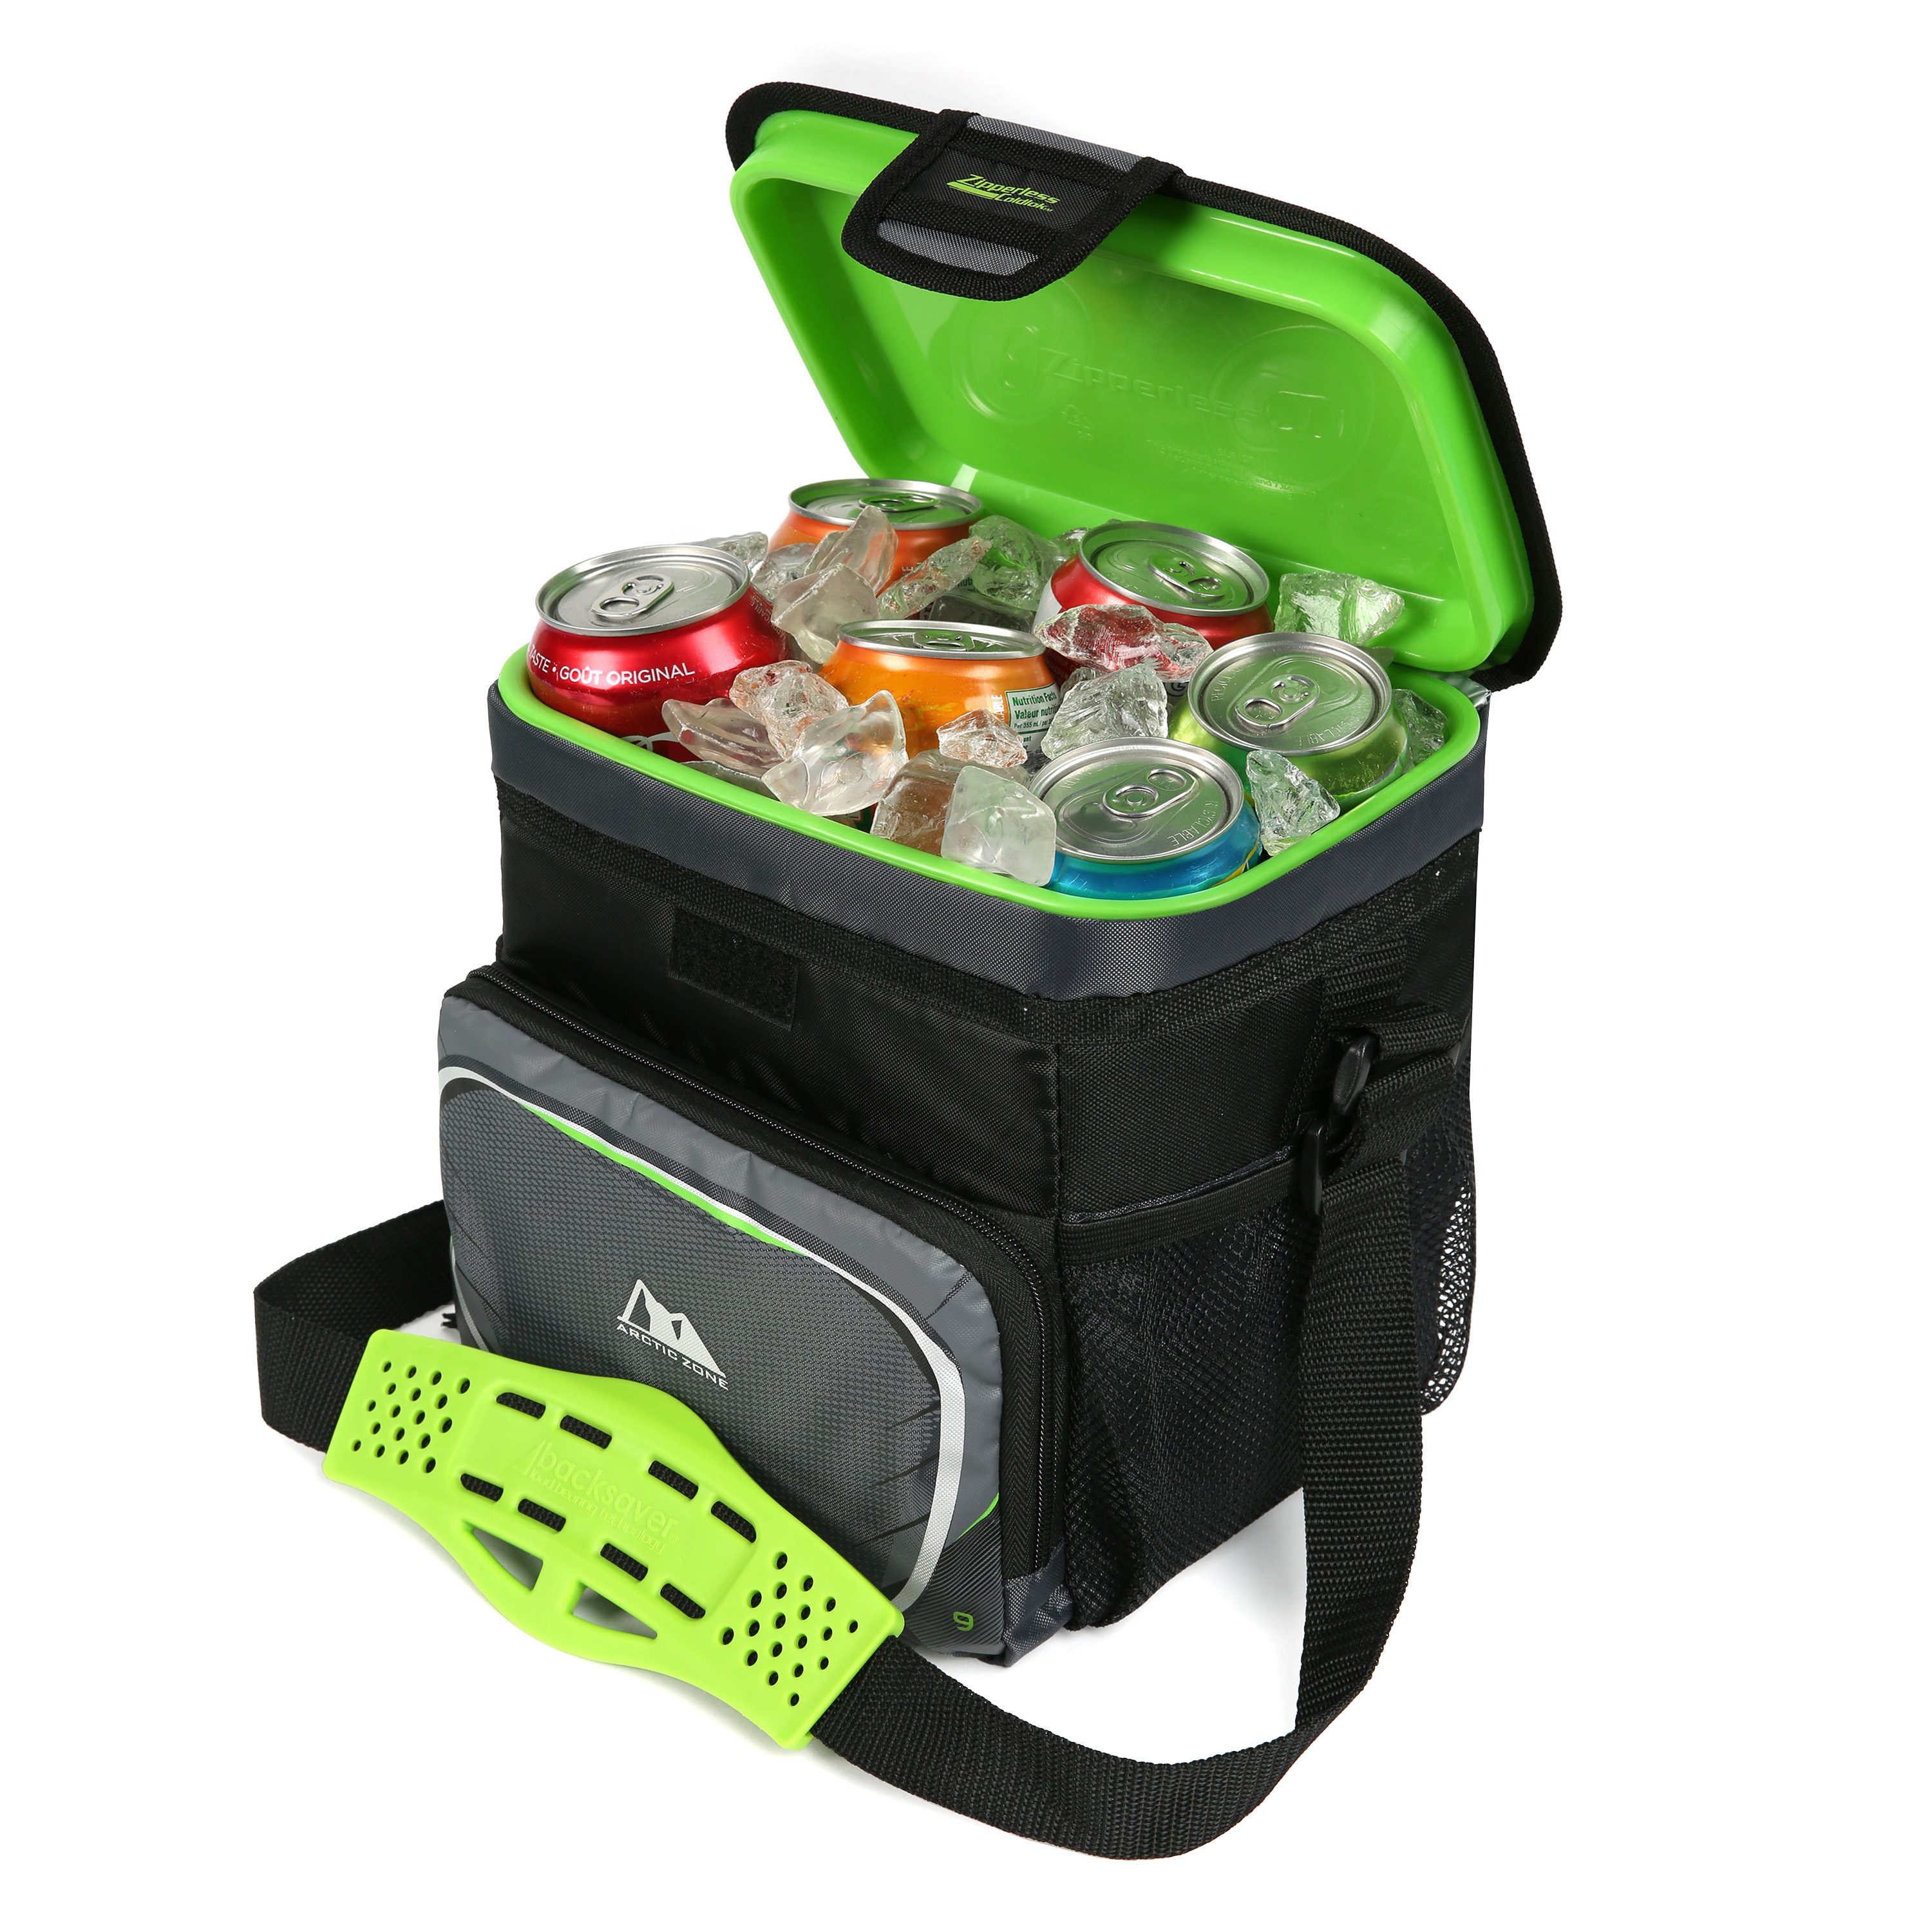 Arctic Zone 9 cans Zipperless Soft Sided Cooler with Hard Liner, Grey and Green - image 3 of 11